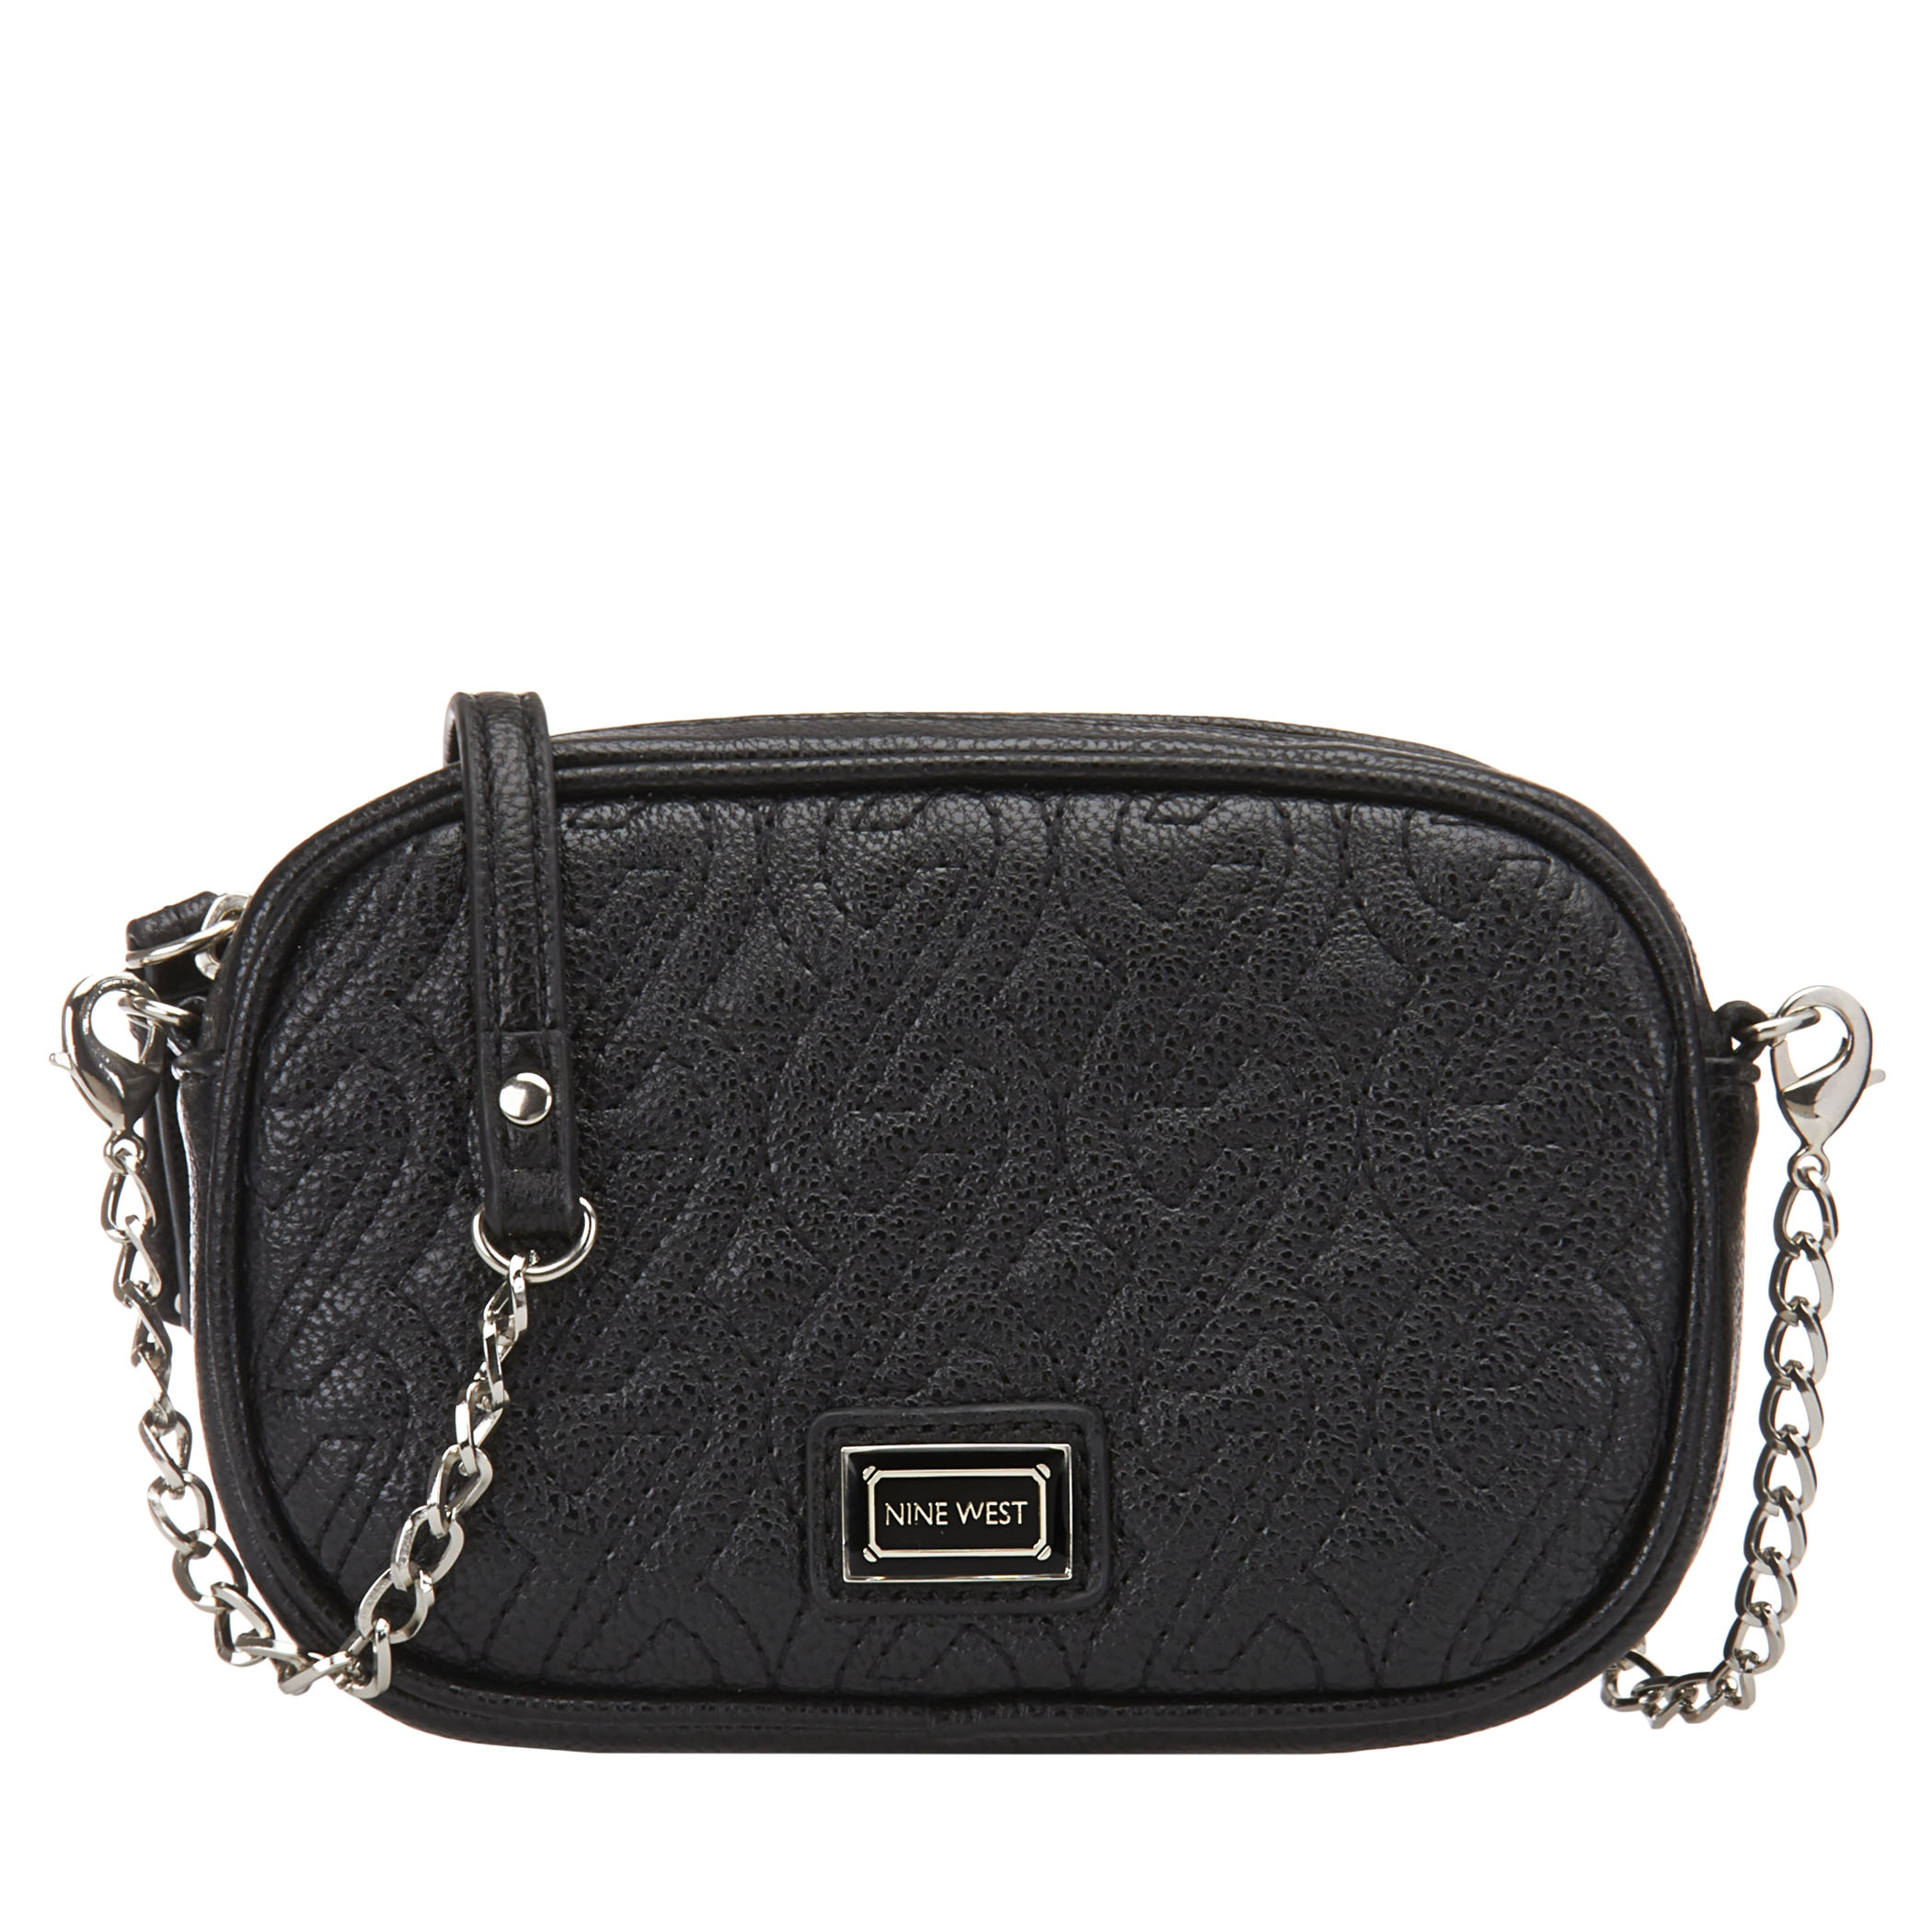 Lyst - Nine West Quilted Crossbody Bag With Chain Detail in Black